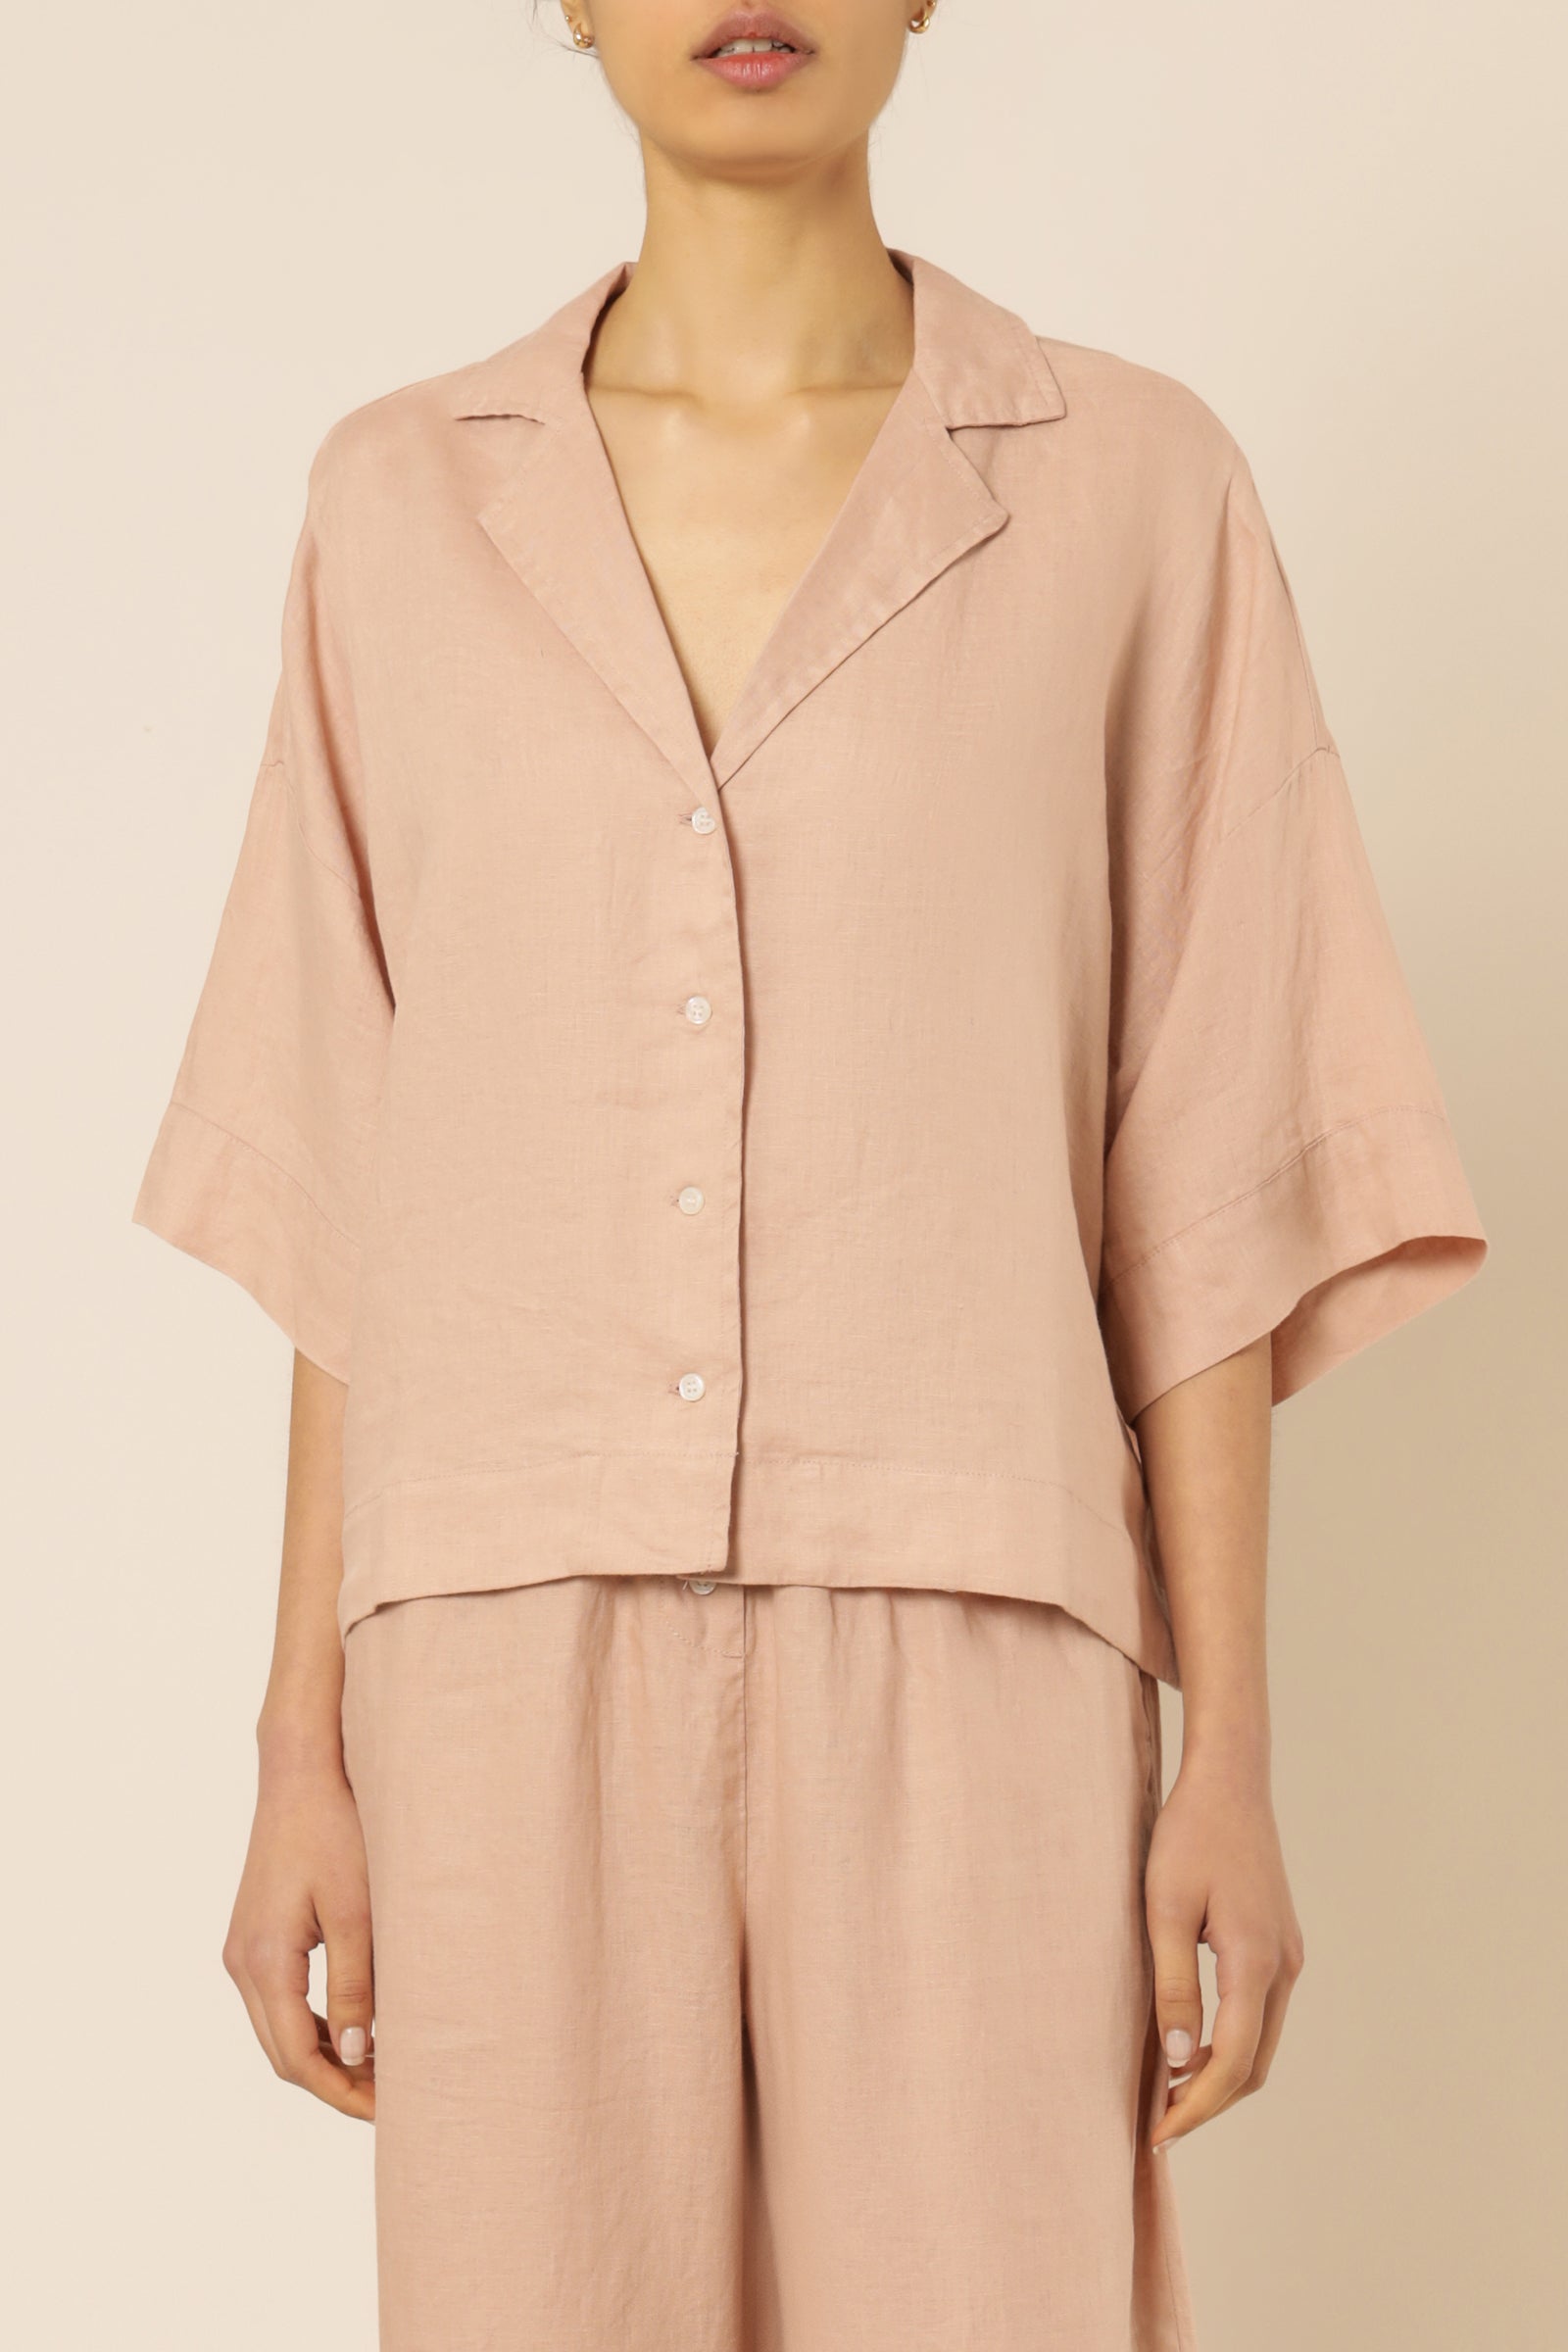 Nude Lucy Nude Lounge Linen Shirt Clay Shirt 